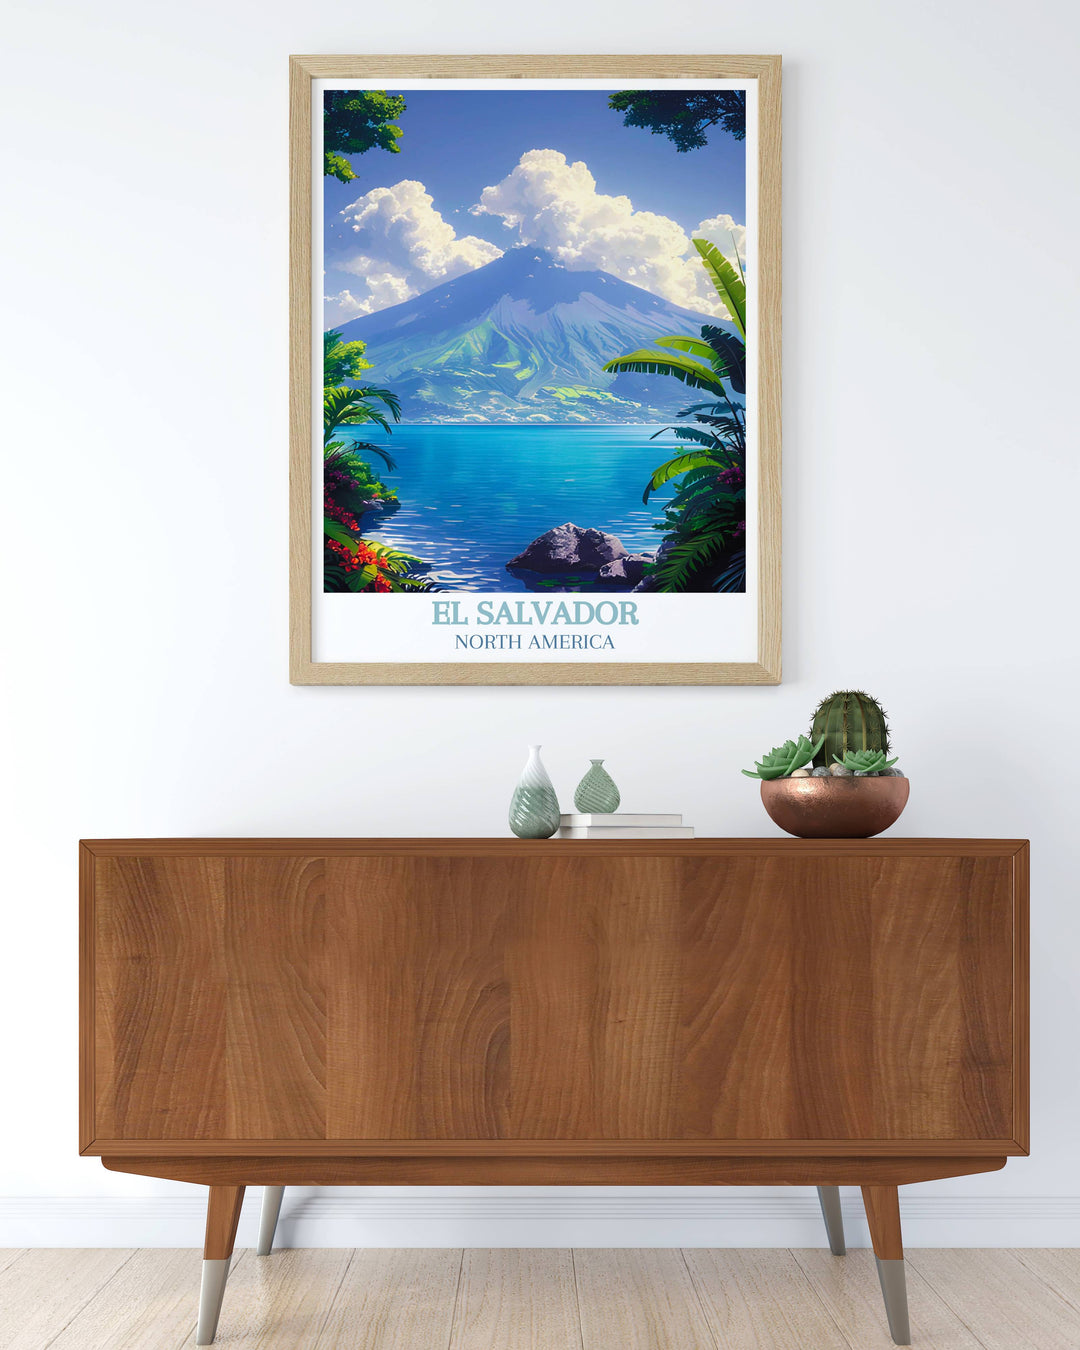 Tranquil waters of Lake Coatepeque under a clear blue sky, framed by green hills, captured in a stunning wall print.